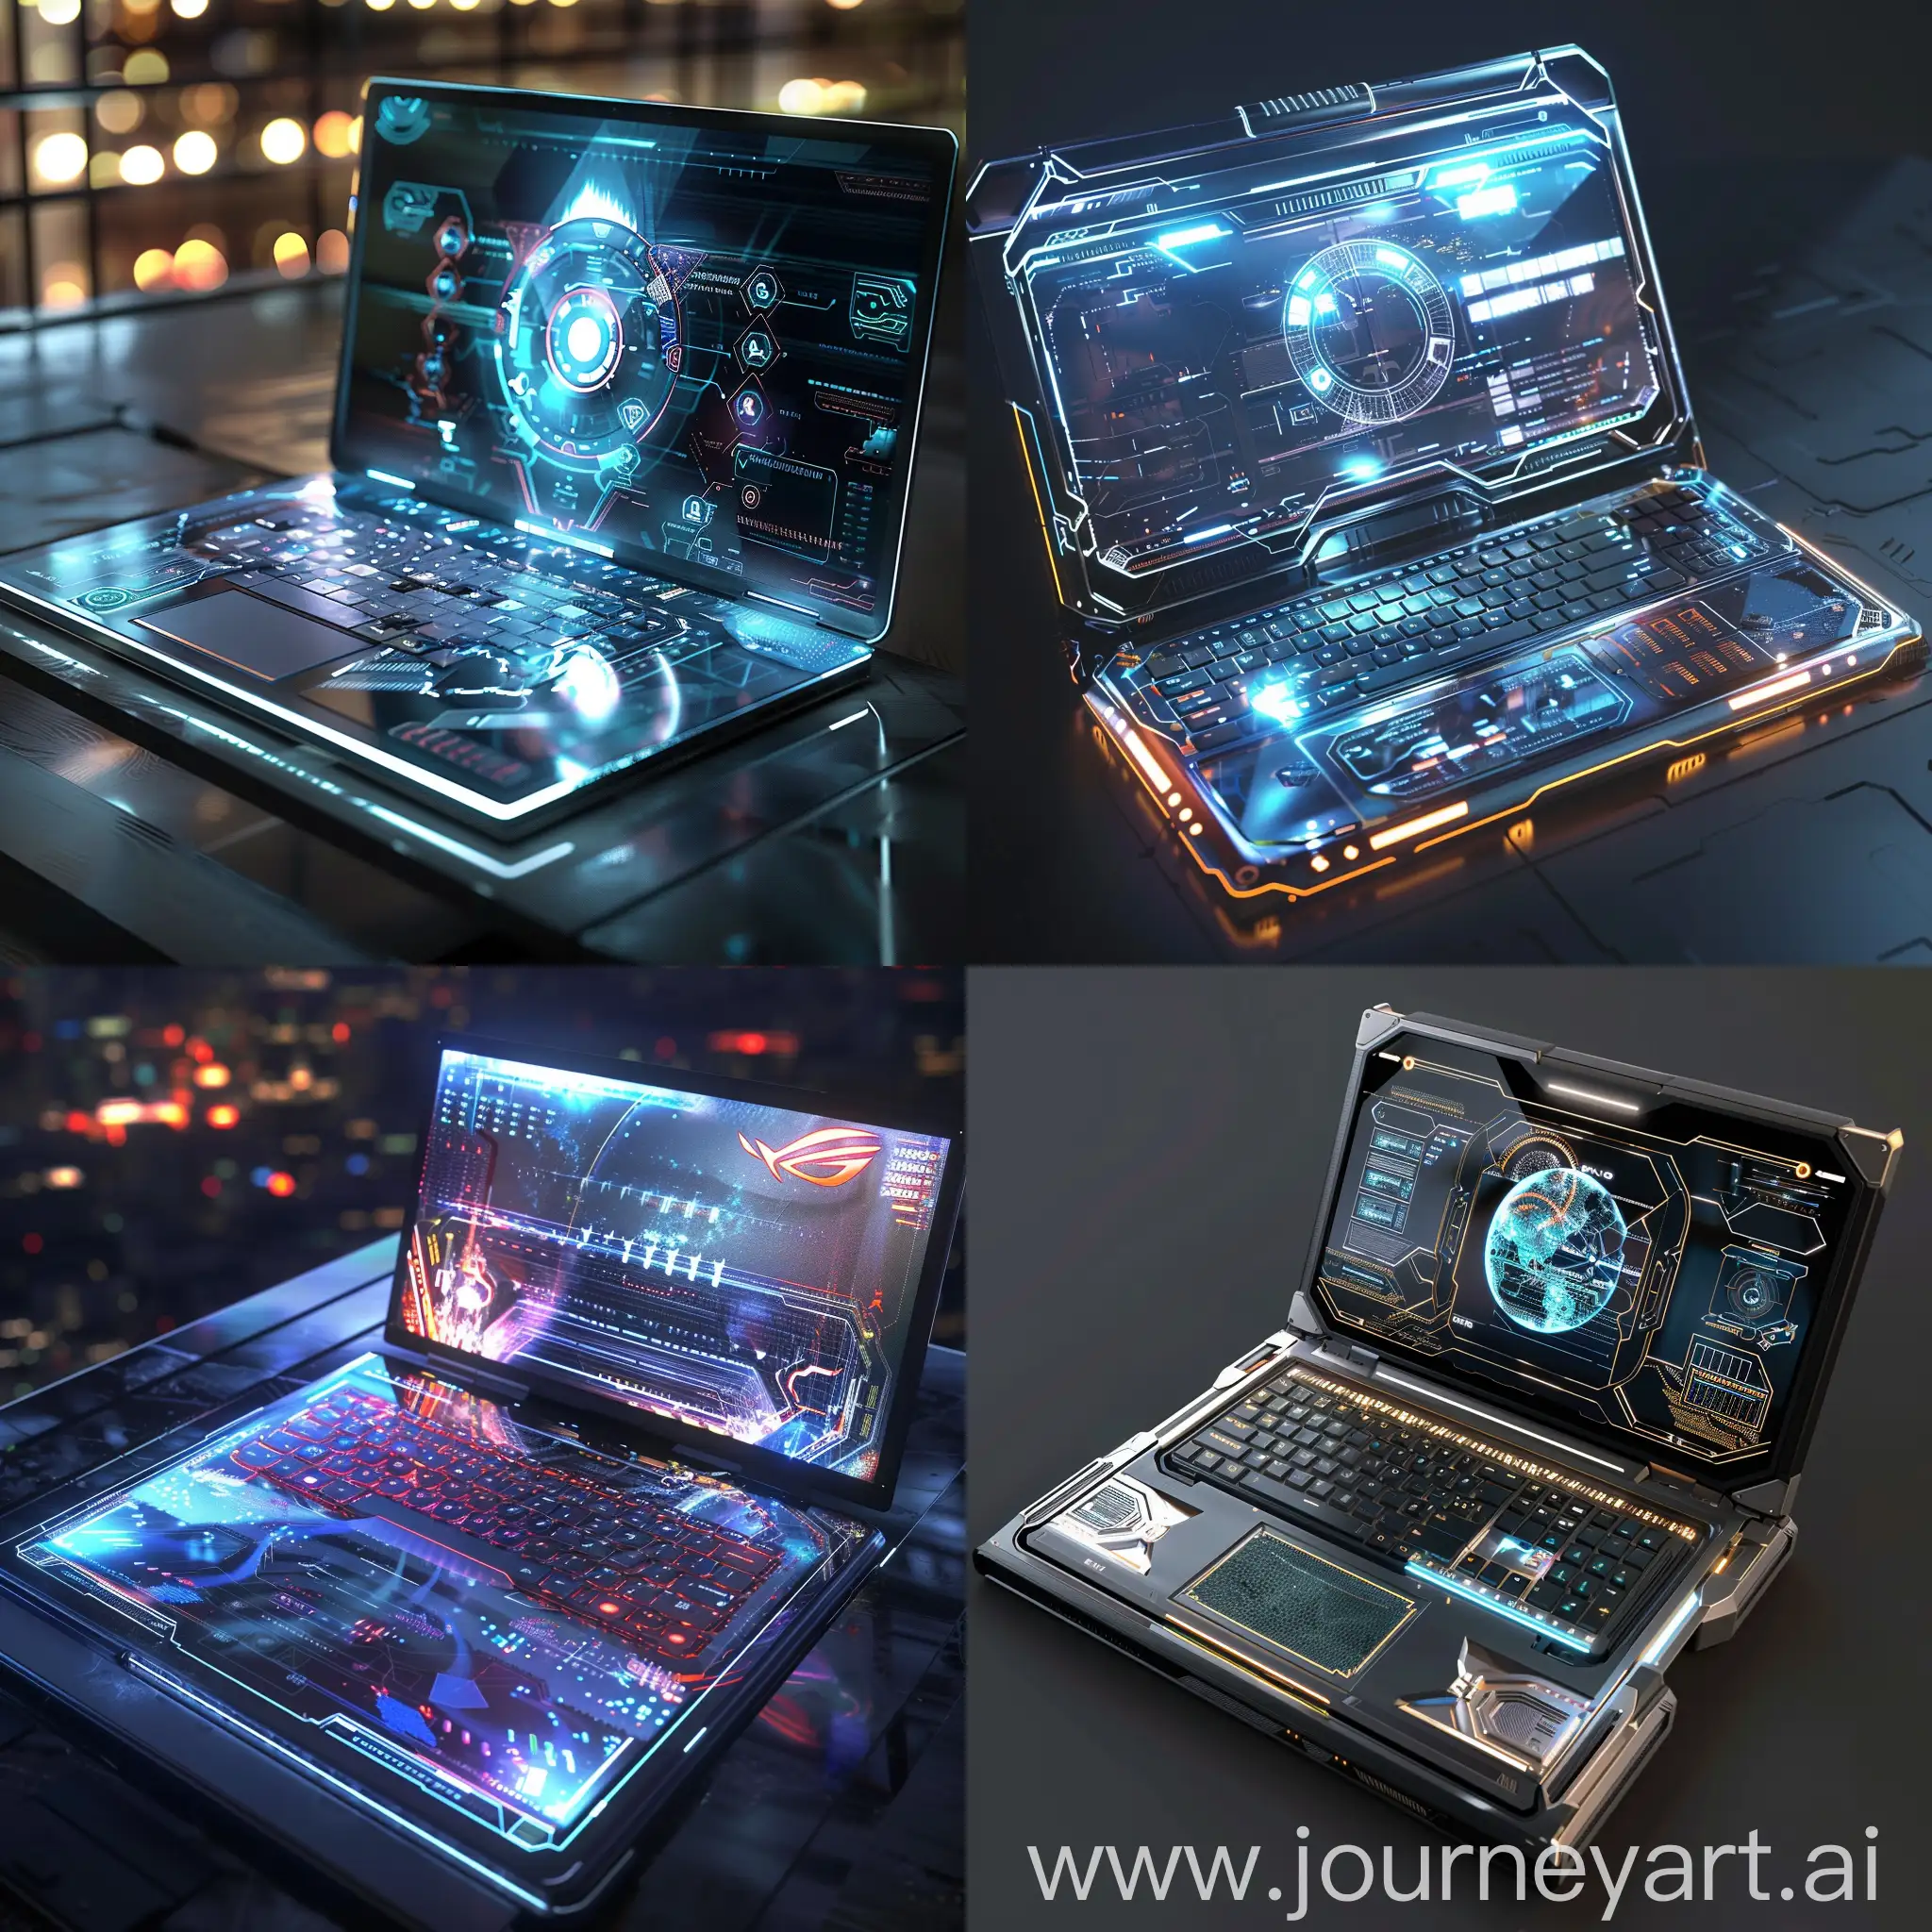 Futuristic-SciFi-Laptop-with-Advanced-Technology-Features